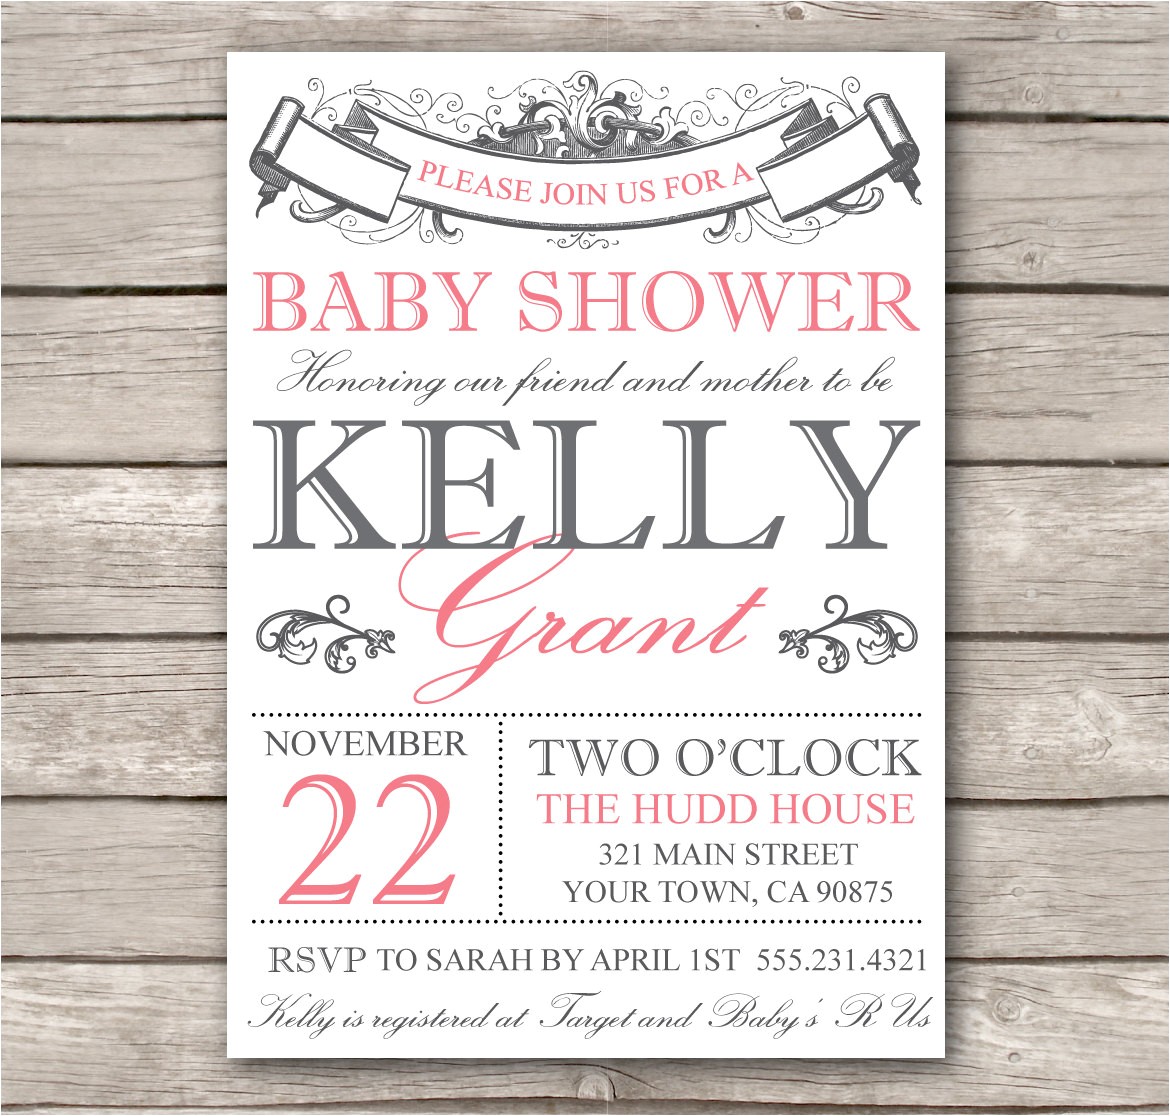 Create Your Own Baby Shower Invitations Online Make Your Own Baby Shower Invitations Line Free